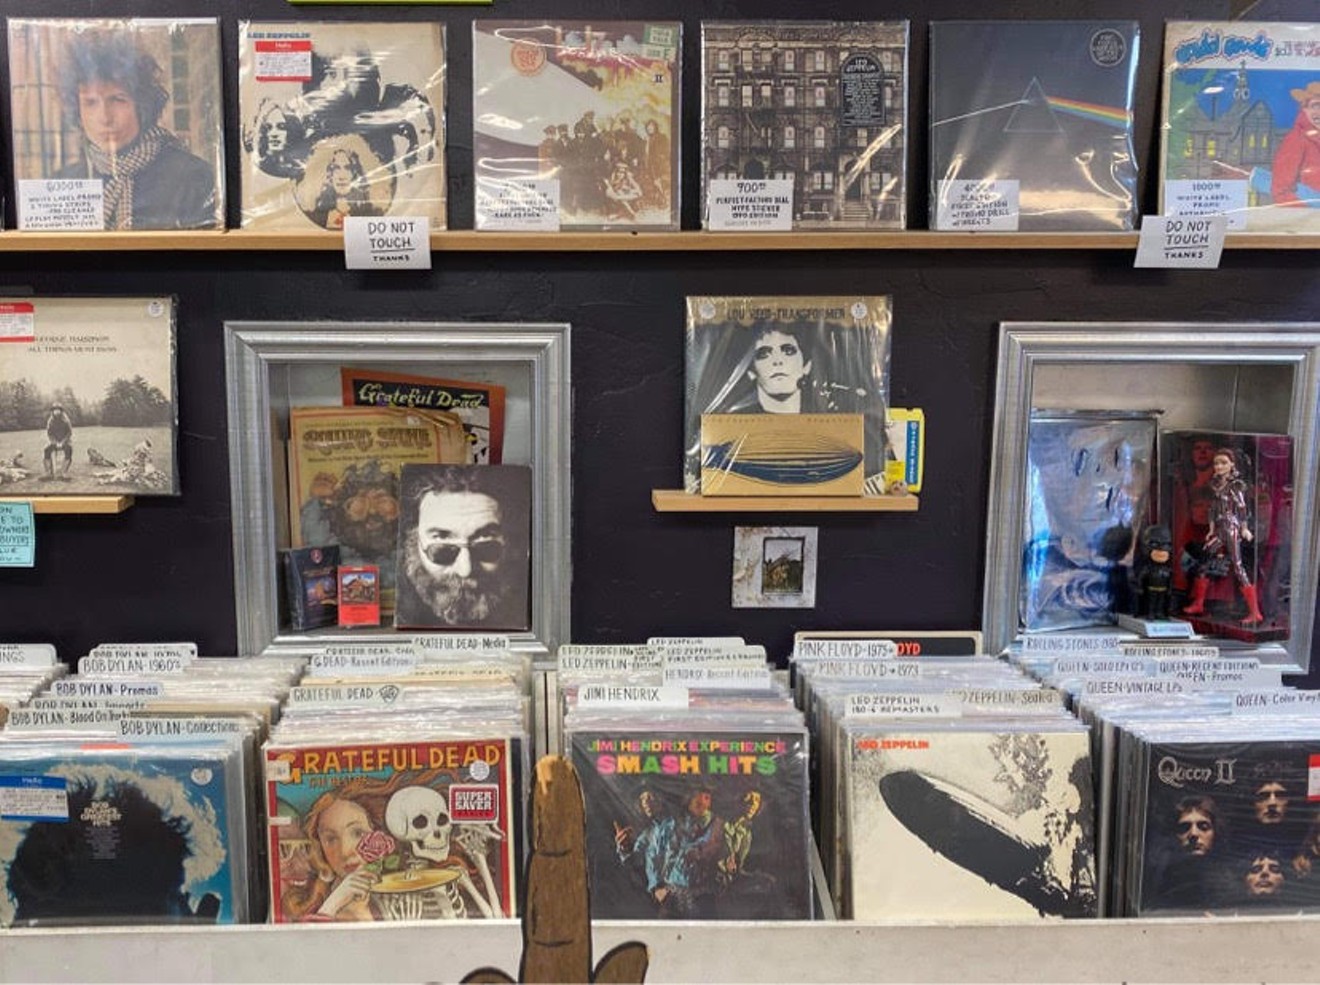 Dallas' 14 Records is one local shop to consider this holiday shopping season.